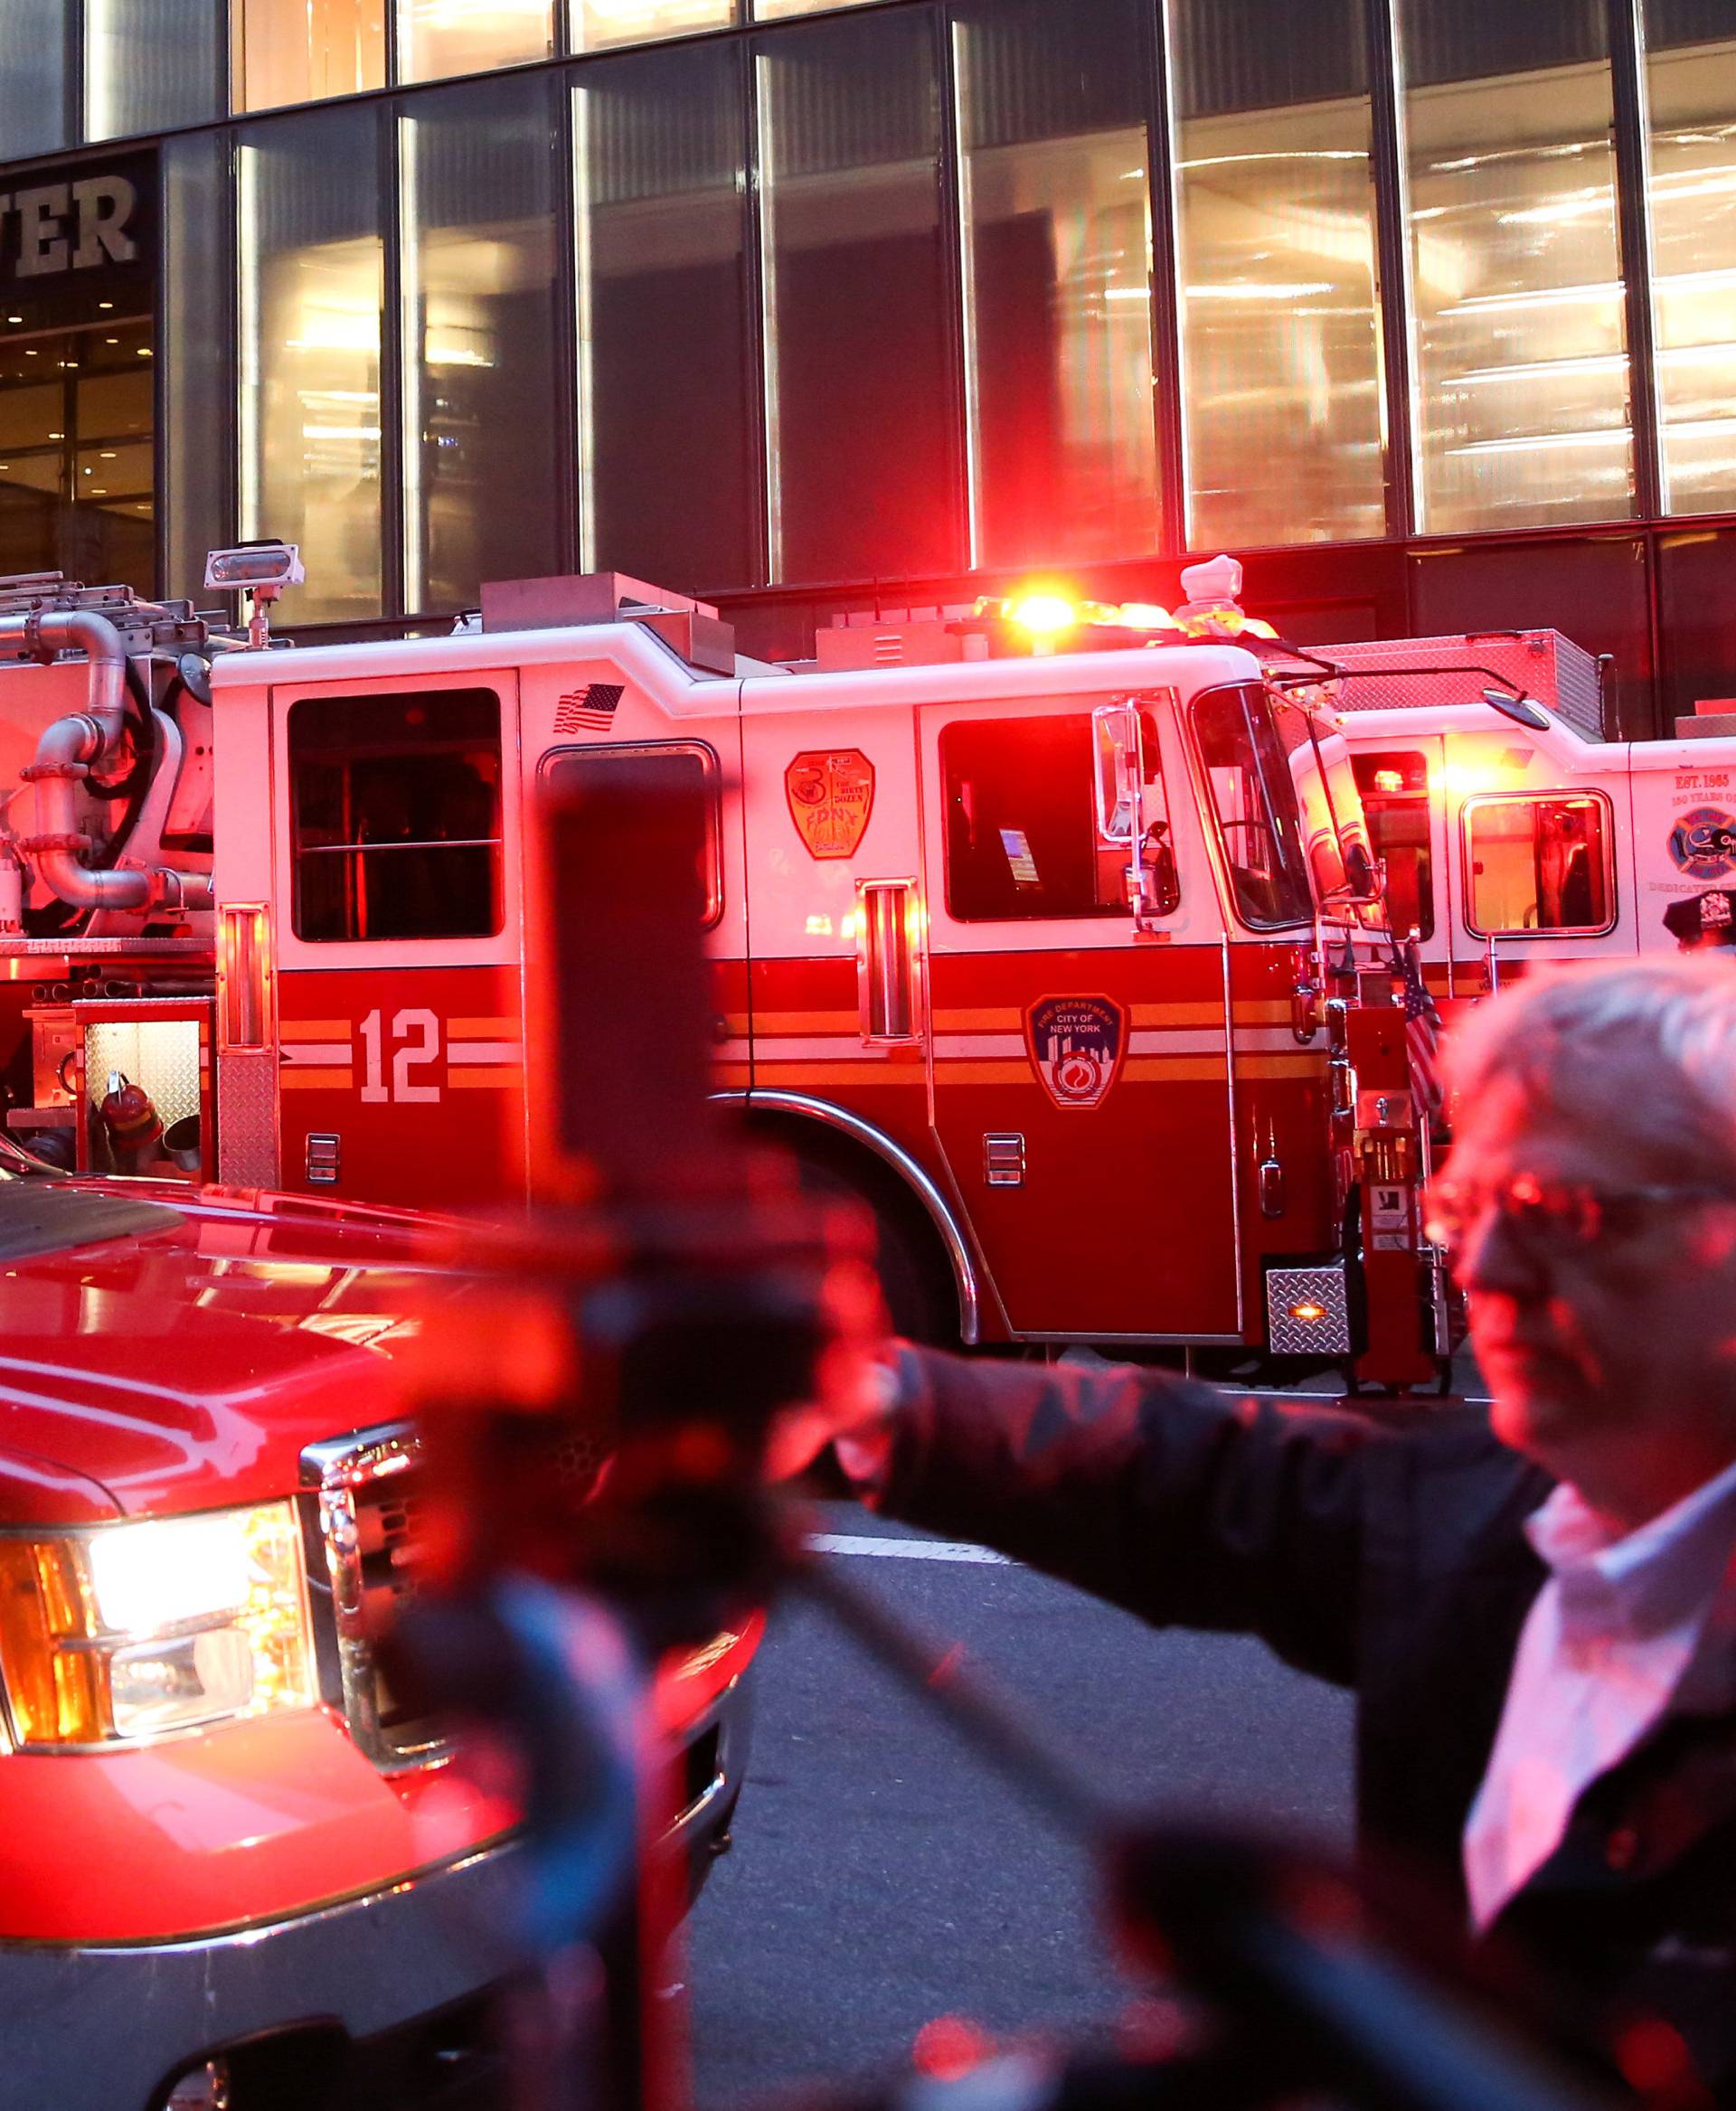 First responders work on a fire in a residential unit at Trump tower in the Manhattan borough of New York City